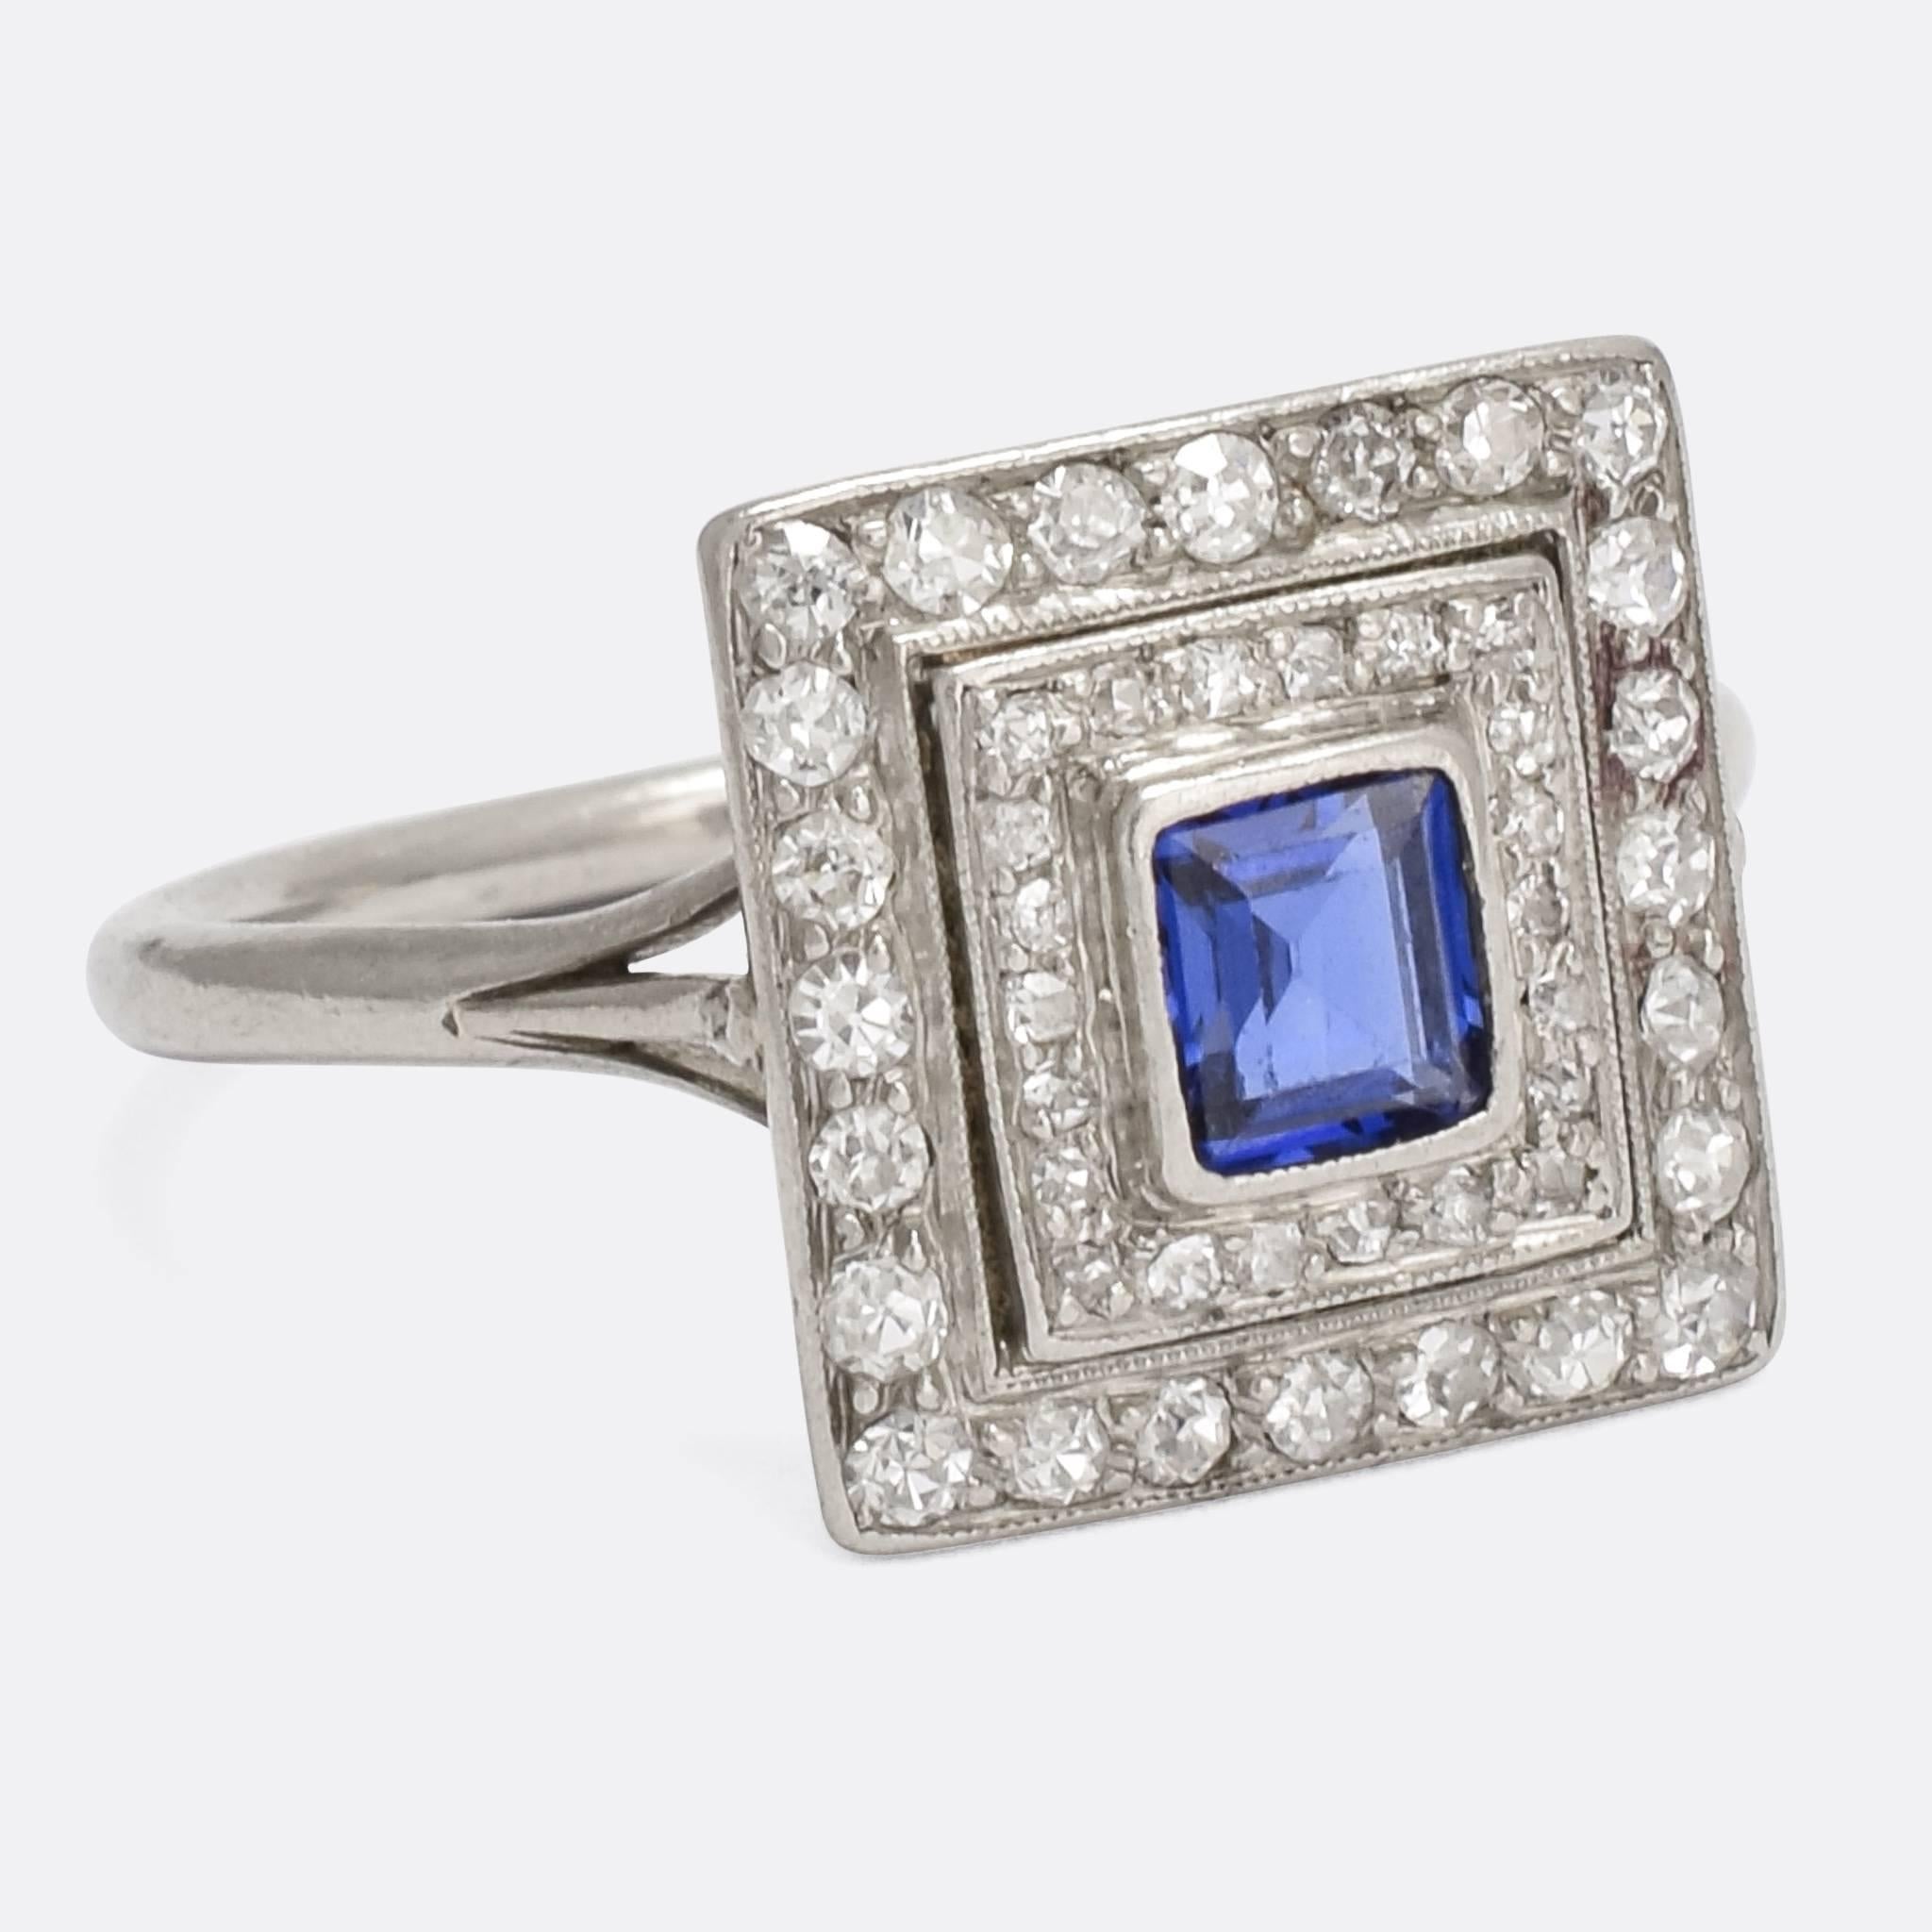 An incredible antique double halo ring, the central blue sapphire is framed by two square halos: each set with old mine cut diamonds and finished in fine millegrain. The head rests on an openworked gallery, allowing light in behind the stones, and